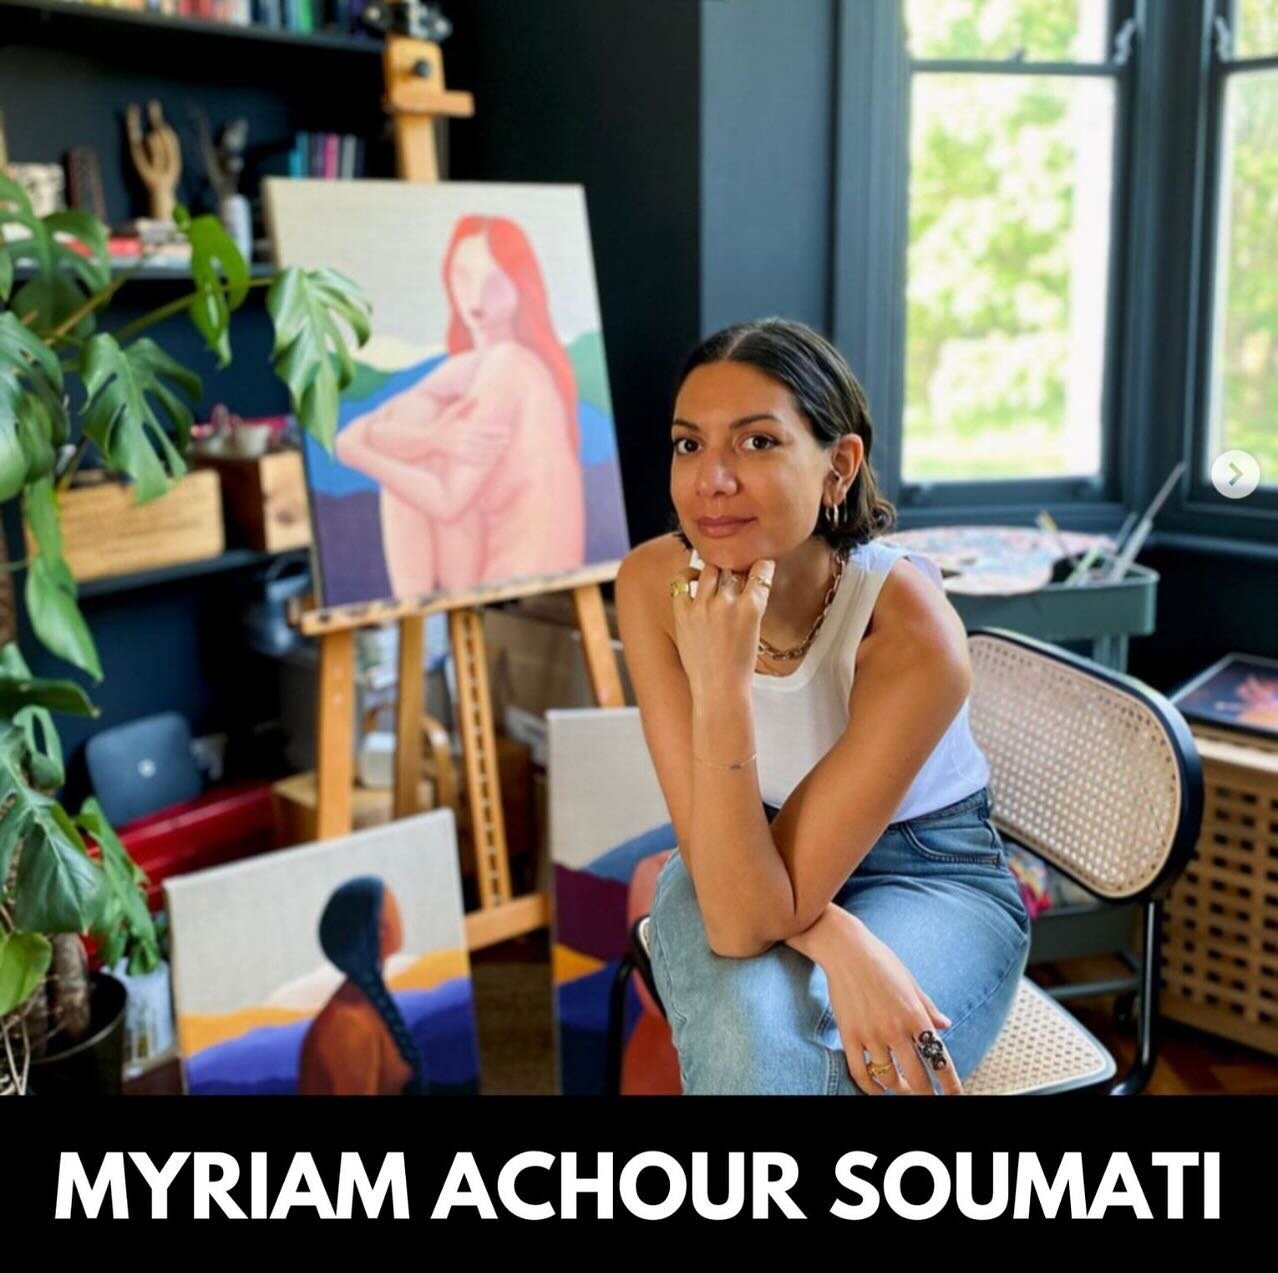 Meet&nbsp;Myriam @soumati_studio 
Pronouns: She/Her/Hers
Job Title: Artist, painter and Illustrator. Founder of @soumati_studio (Also, Freelance Producer and Project Manager)

Today we are celebrating Myriam as part of our &lsquo;Any Brief&rsquo; cam